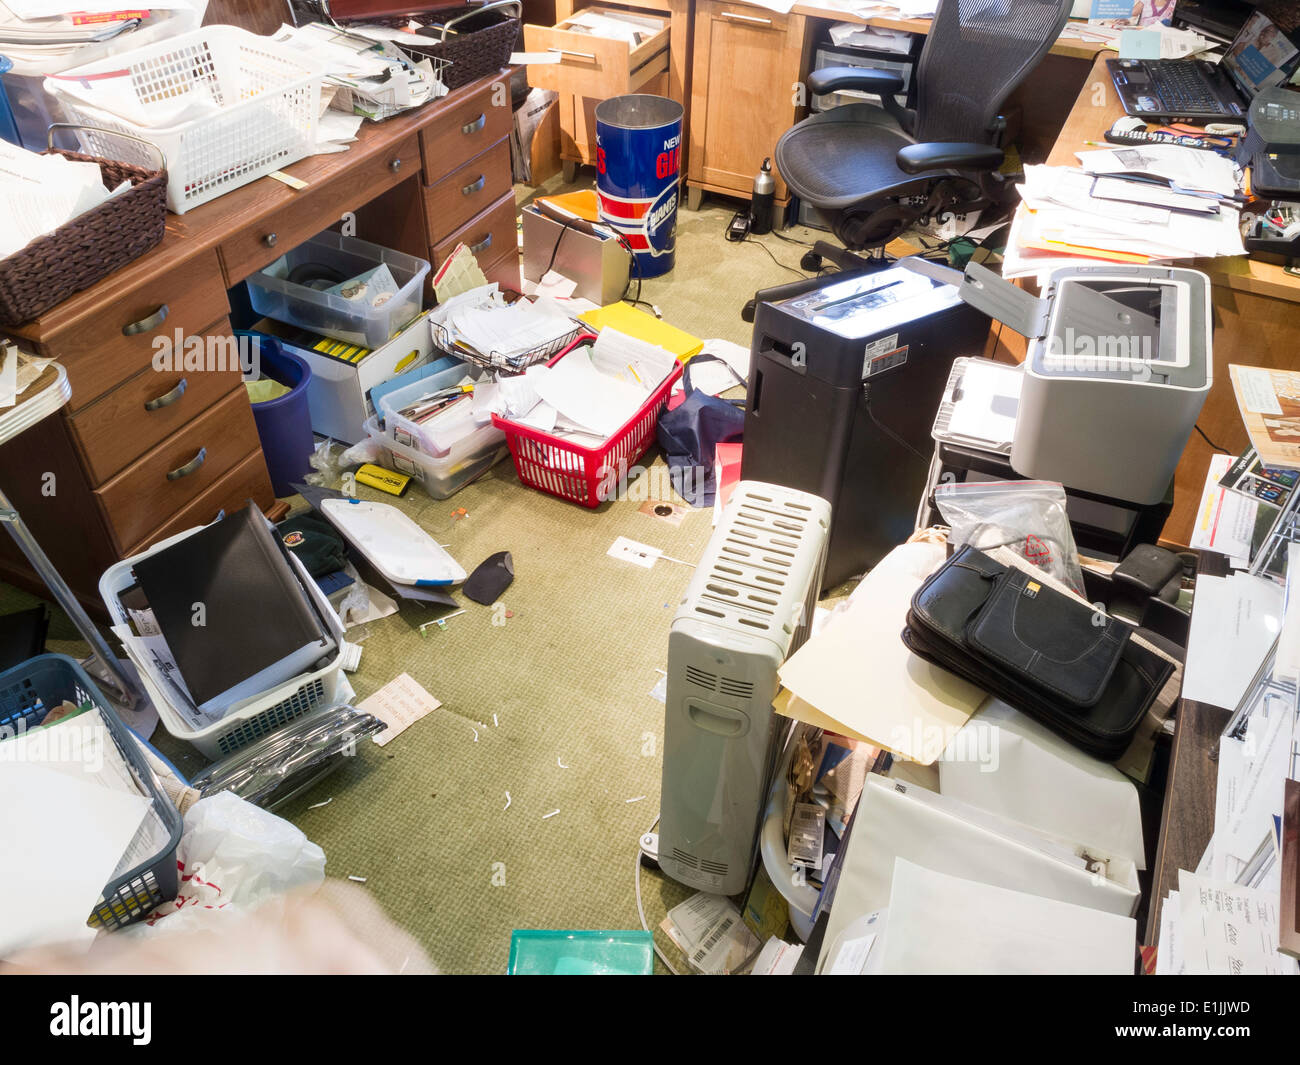 Junk in Hoarders' Messy Office, USA Stock Photo: 69866089 - Alamy